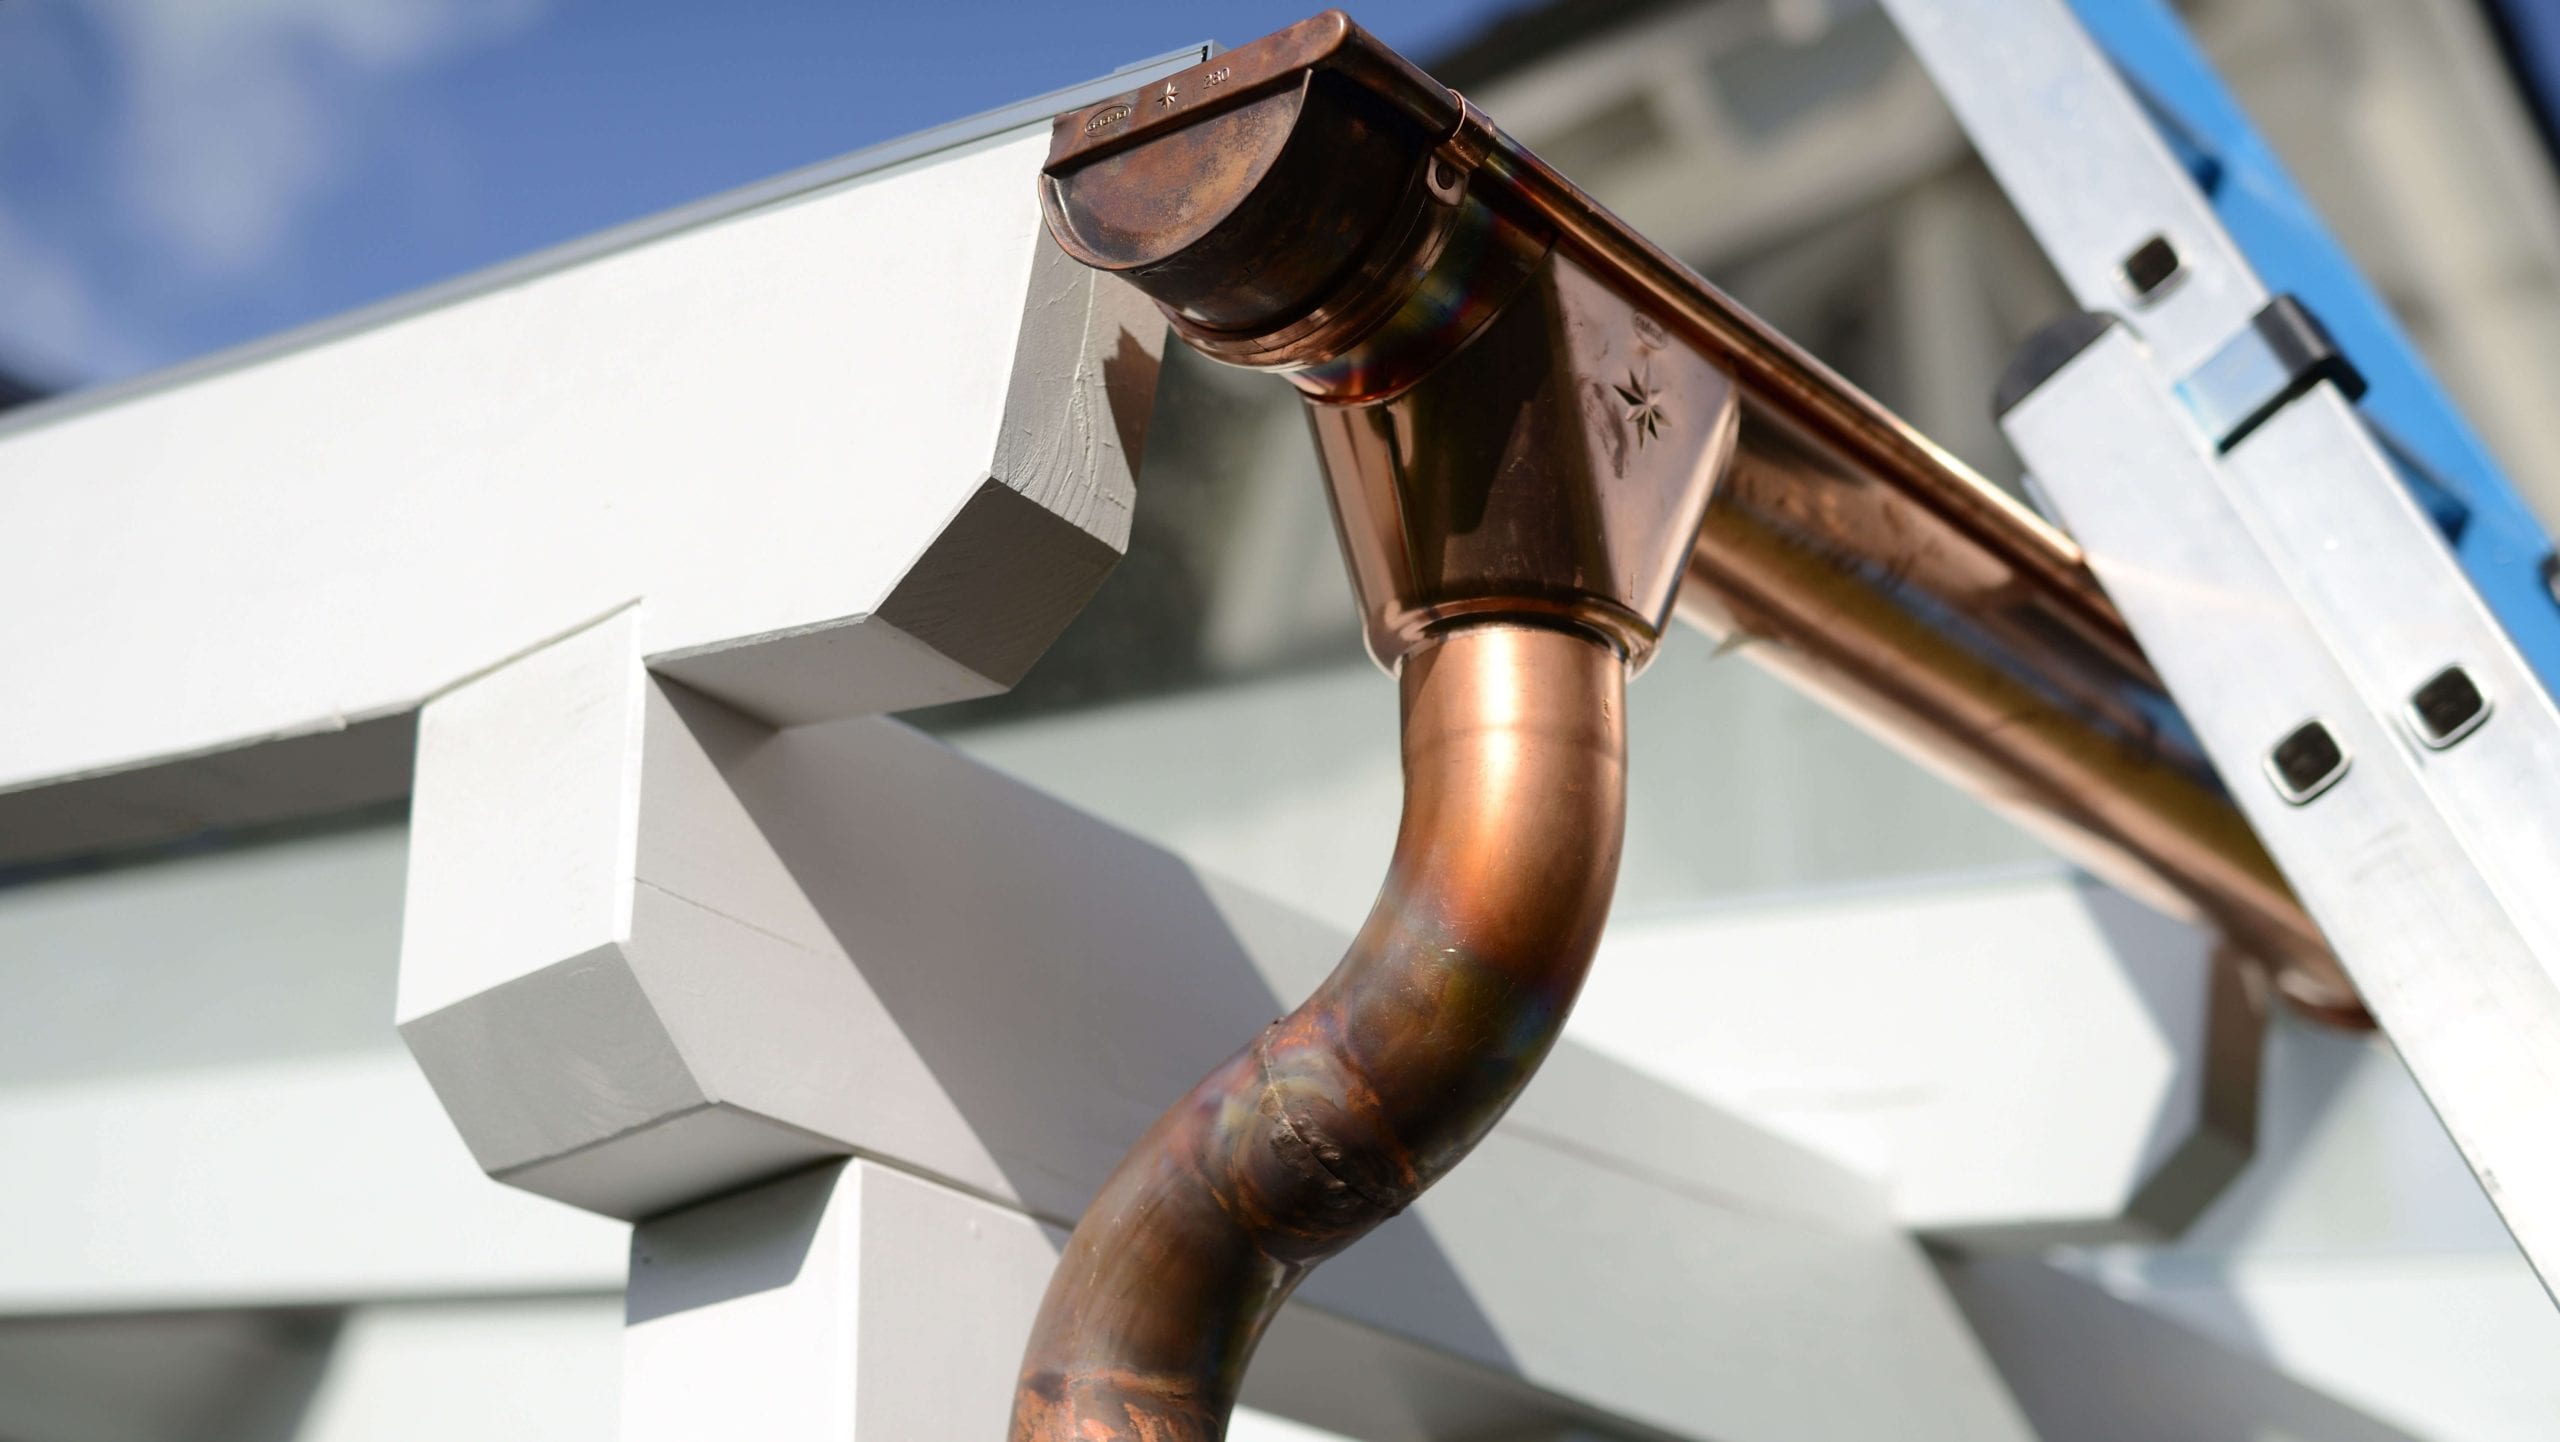 Make your property stand out with copper gutters. Contact for gutter installation in Pensacola